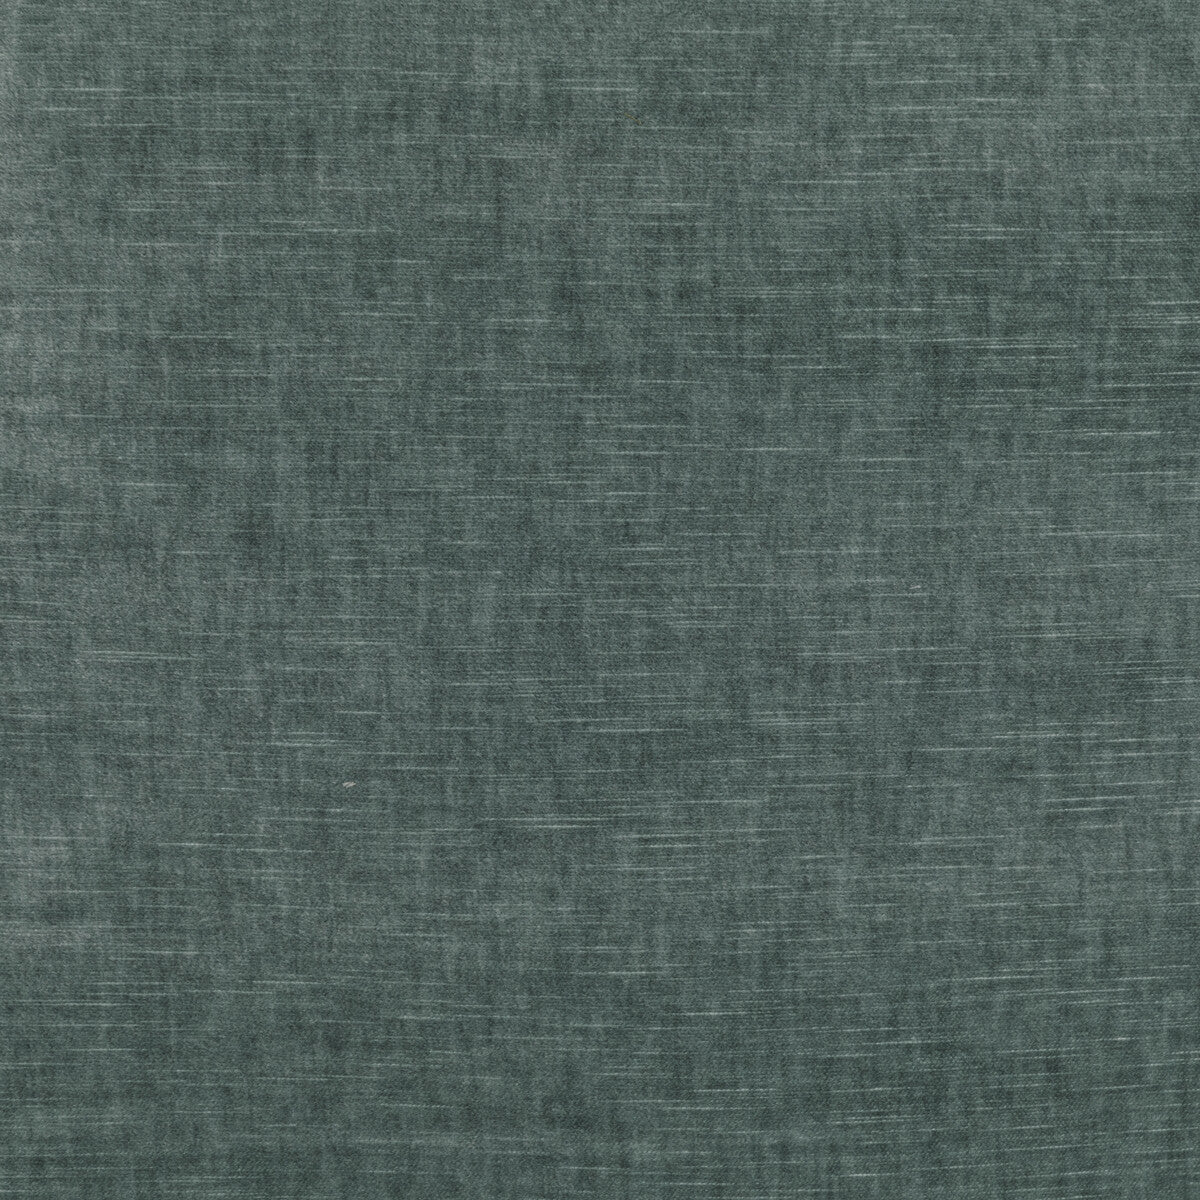 Montage fabric in glacial color - pattern GWF-3526.135.0 - by Lee Jofa Modern in the Kelly Wearstler VI collection